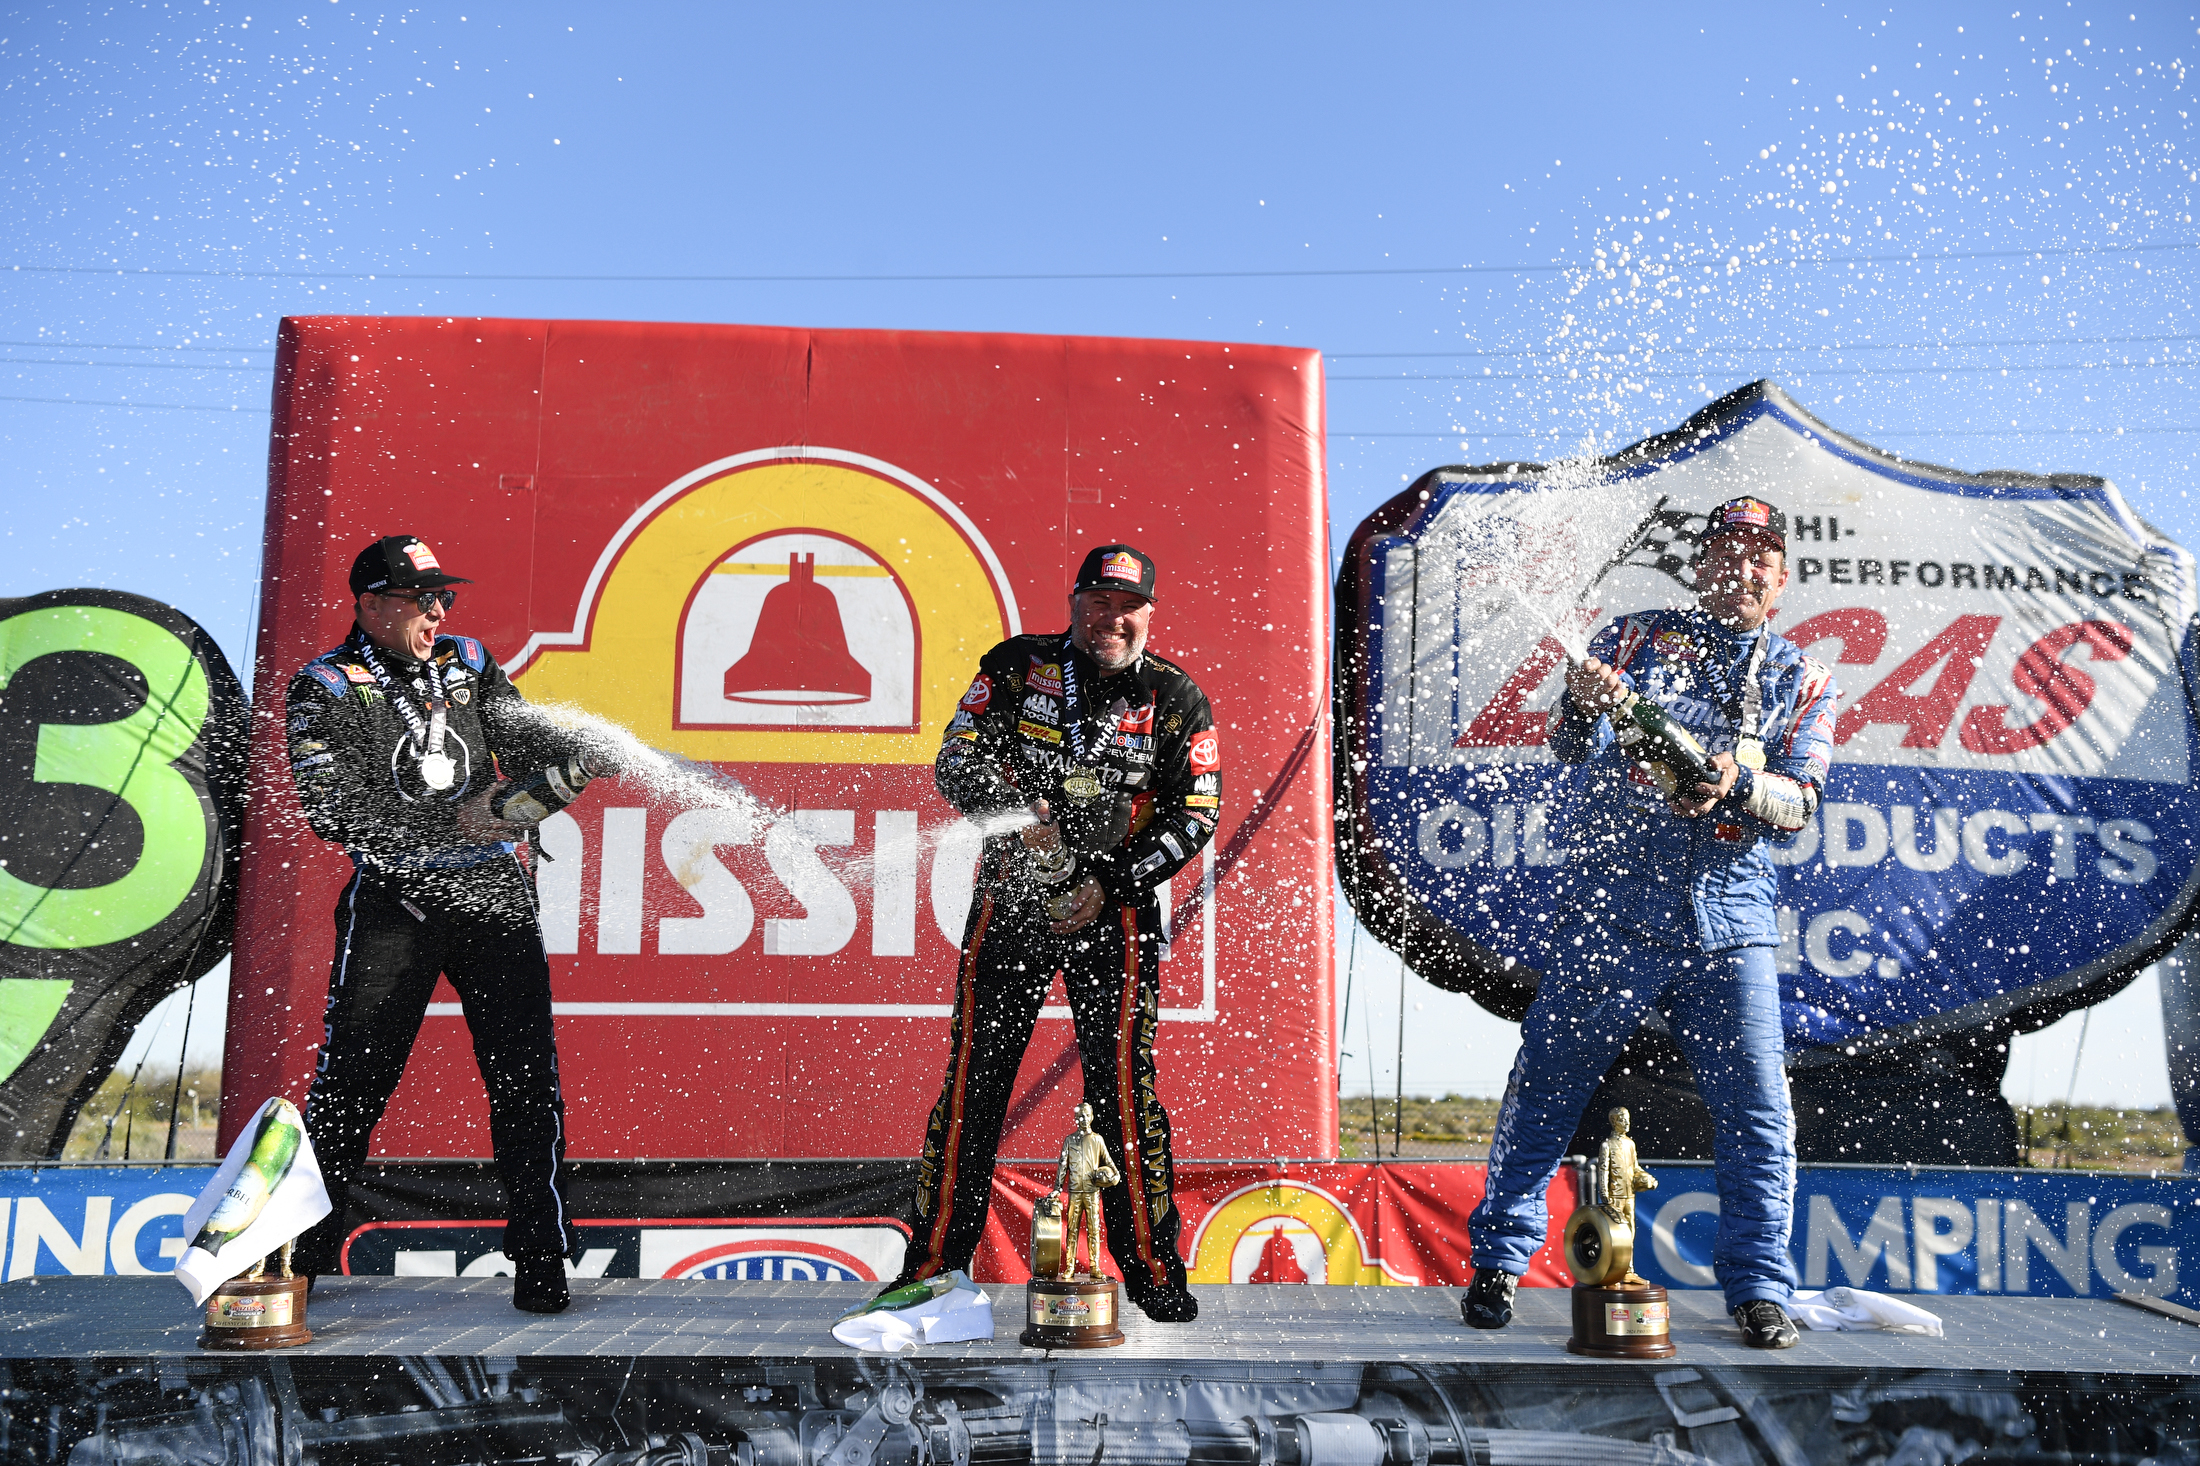 Greg Anderson joined Austin Prock (funny car) and Shawn Langdon (Top Fuel) as Arizona Nationals winners.